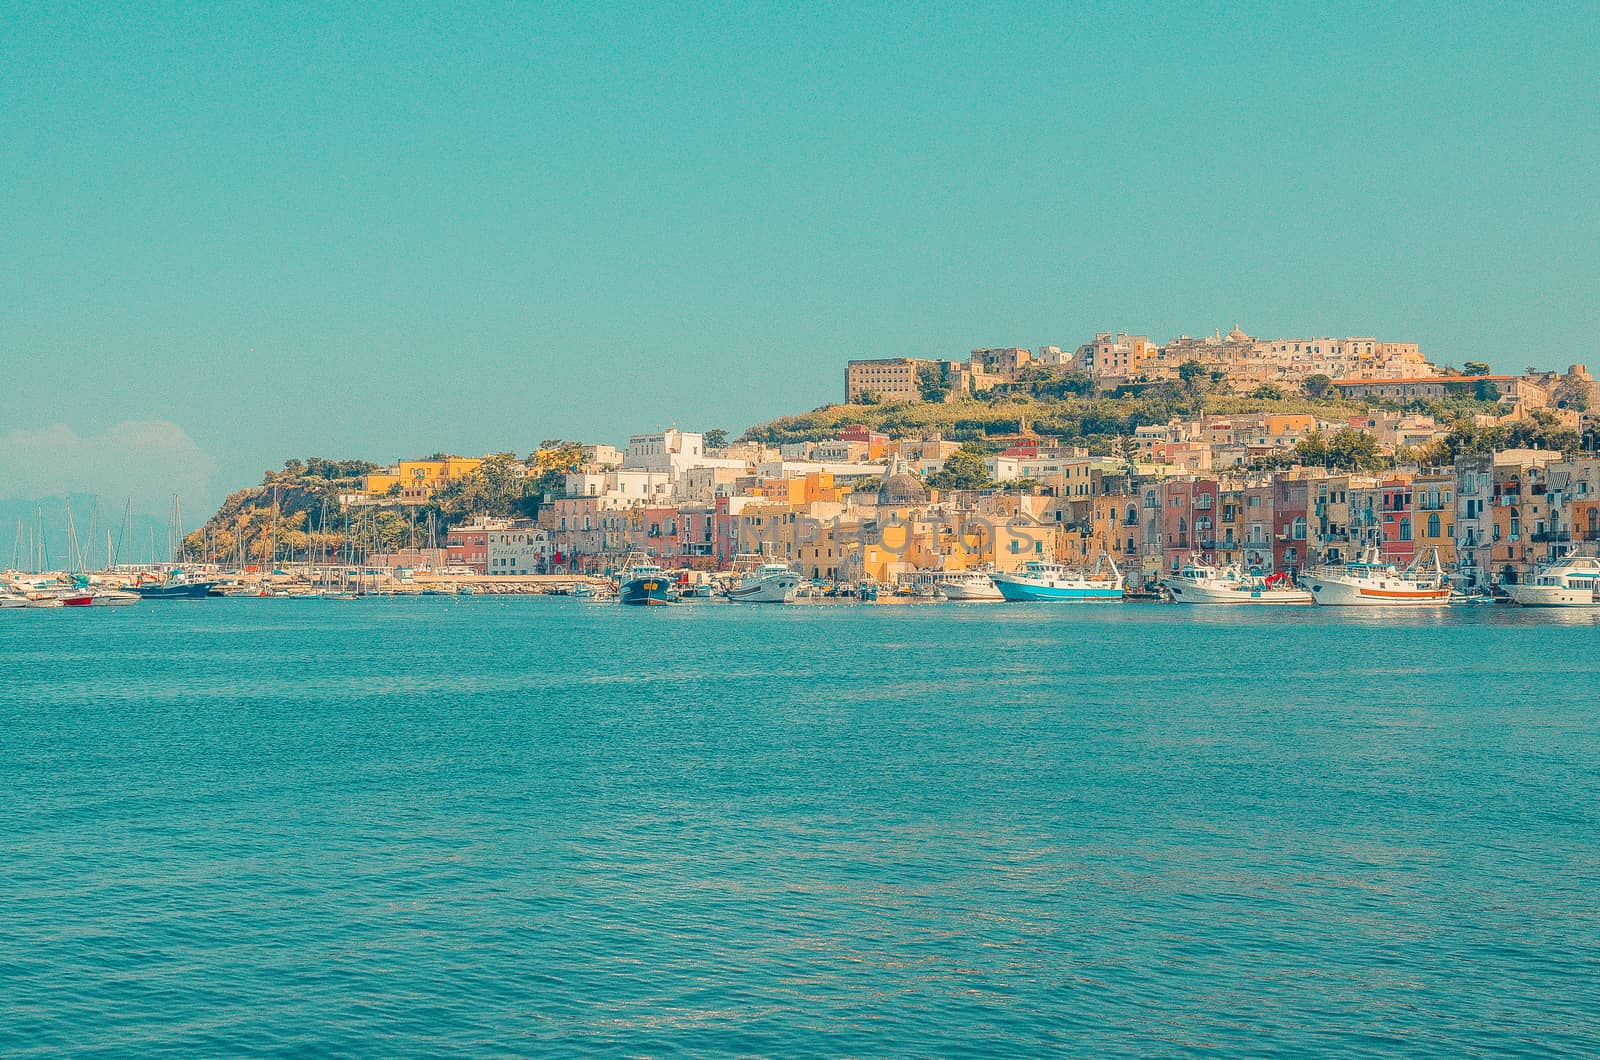 View of the port of Procida island - one of the Flegrean Islands off the coast of Naples in southern Italy